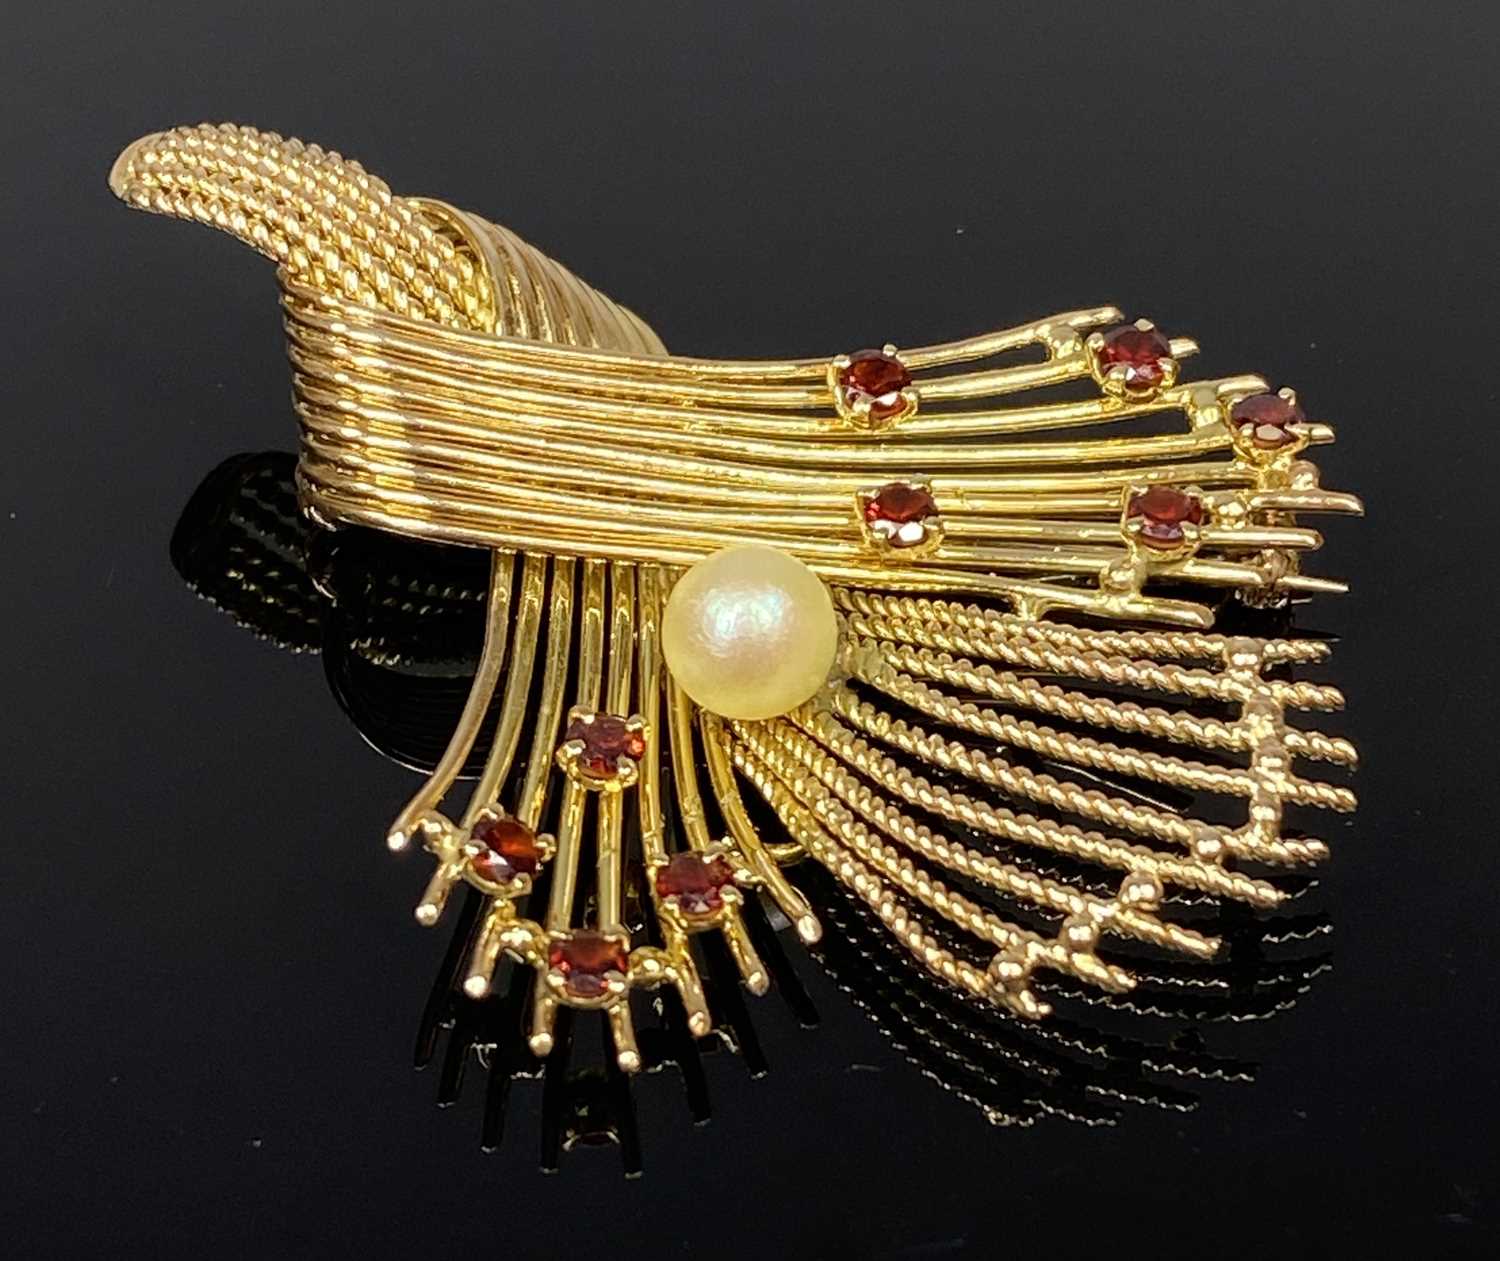 TWO 9CT GOLD GARNET SET BROOCHES, the first with a central pearl, brooch fashioned as a twisted knot - Image 3 of 4